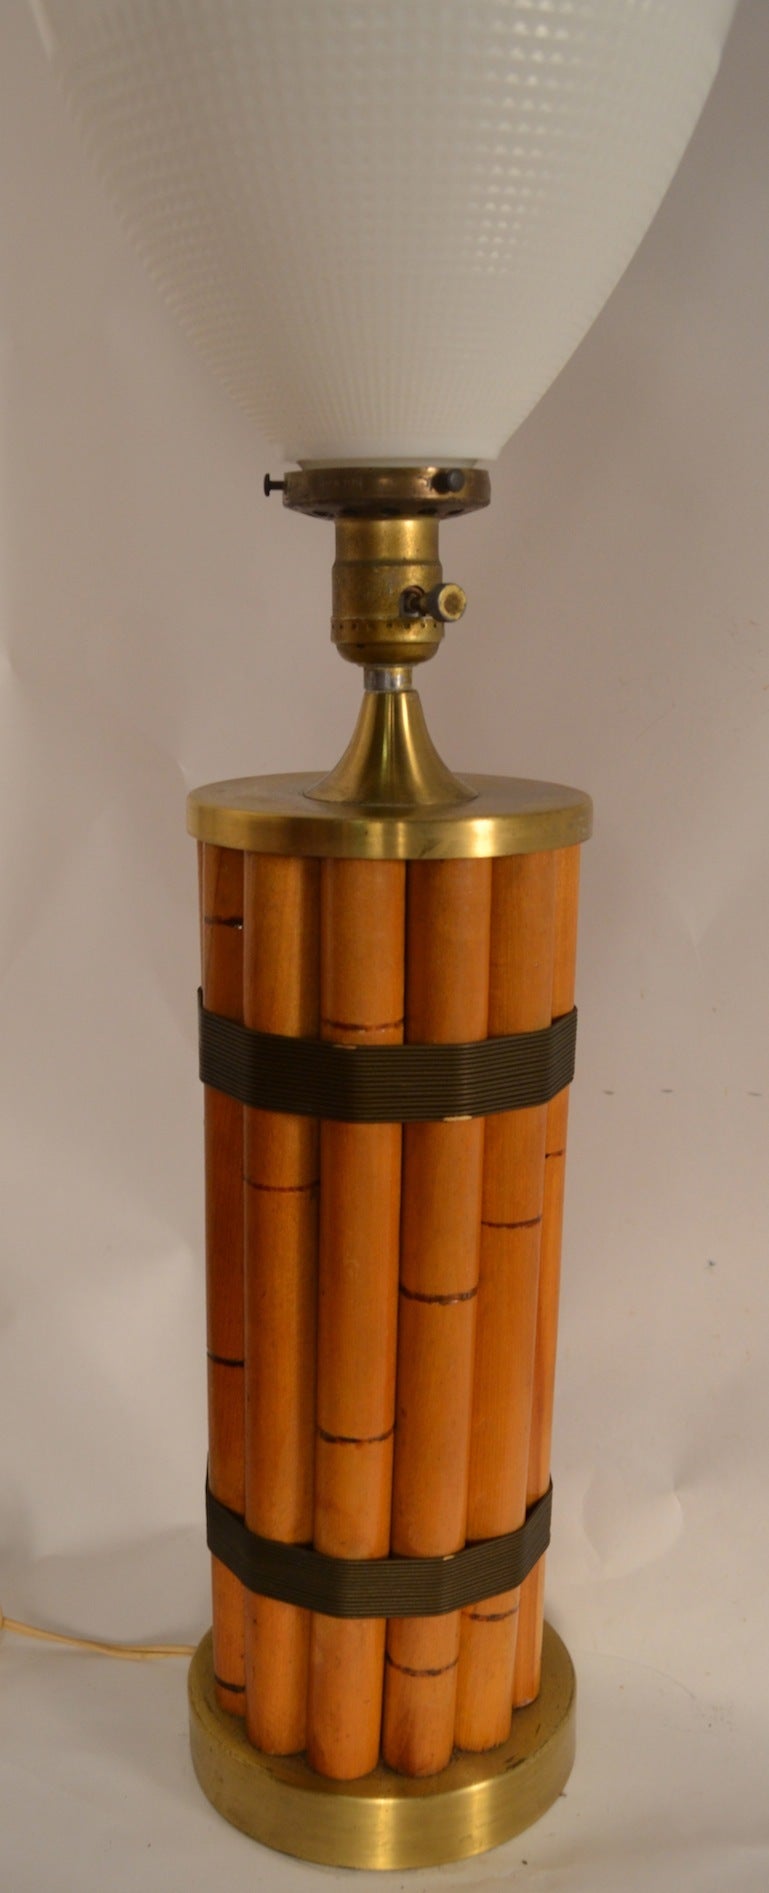 Bamboo wrapped with brass wire table lamp designed by Russel Wright. Height of base w/o glass shade 13.5